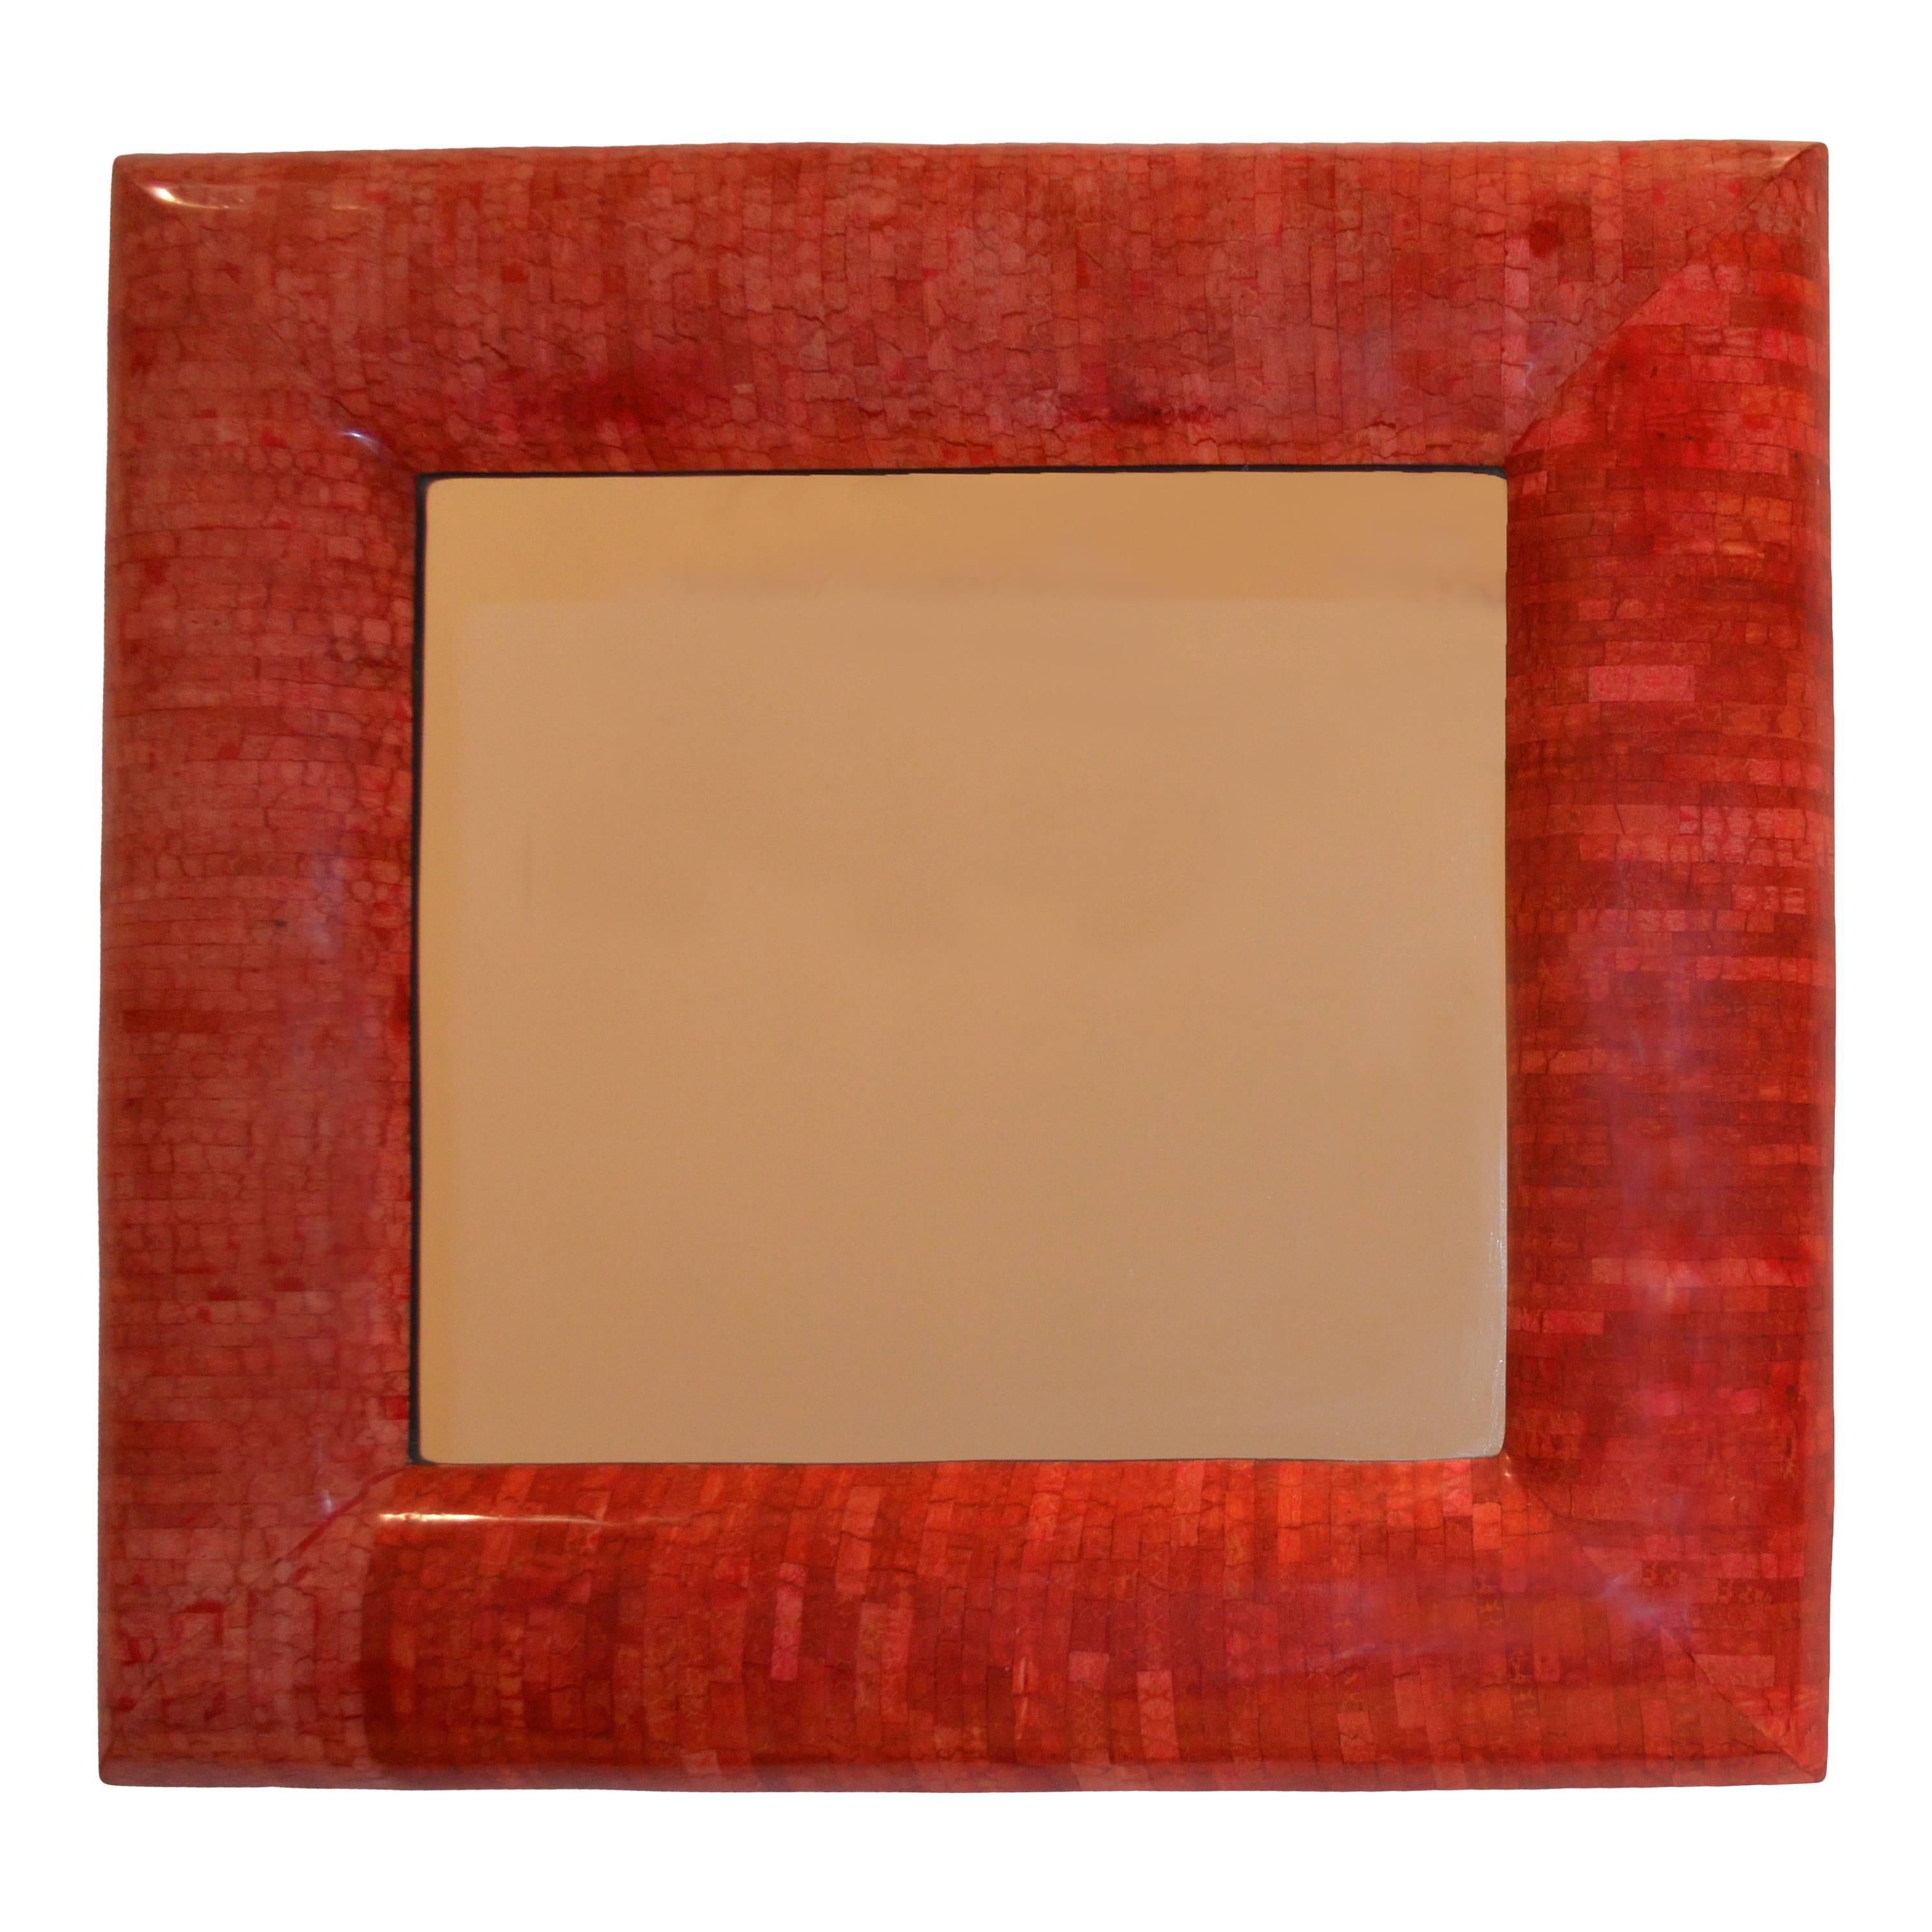 Andrianna Shamaris Red Coral Mirror with Bevelled Frame